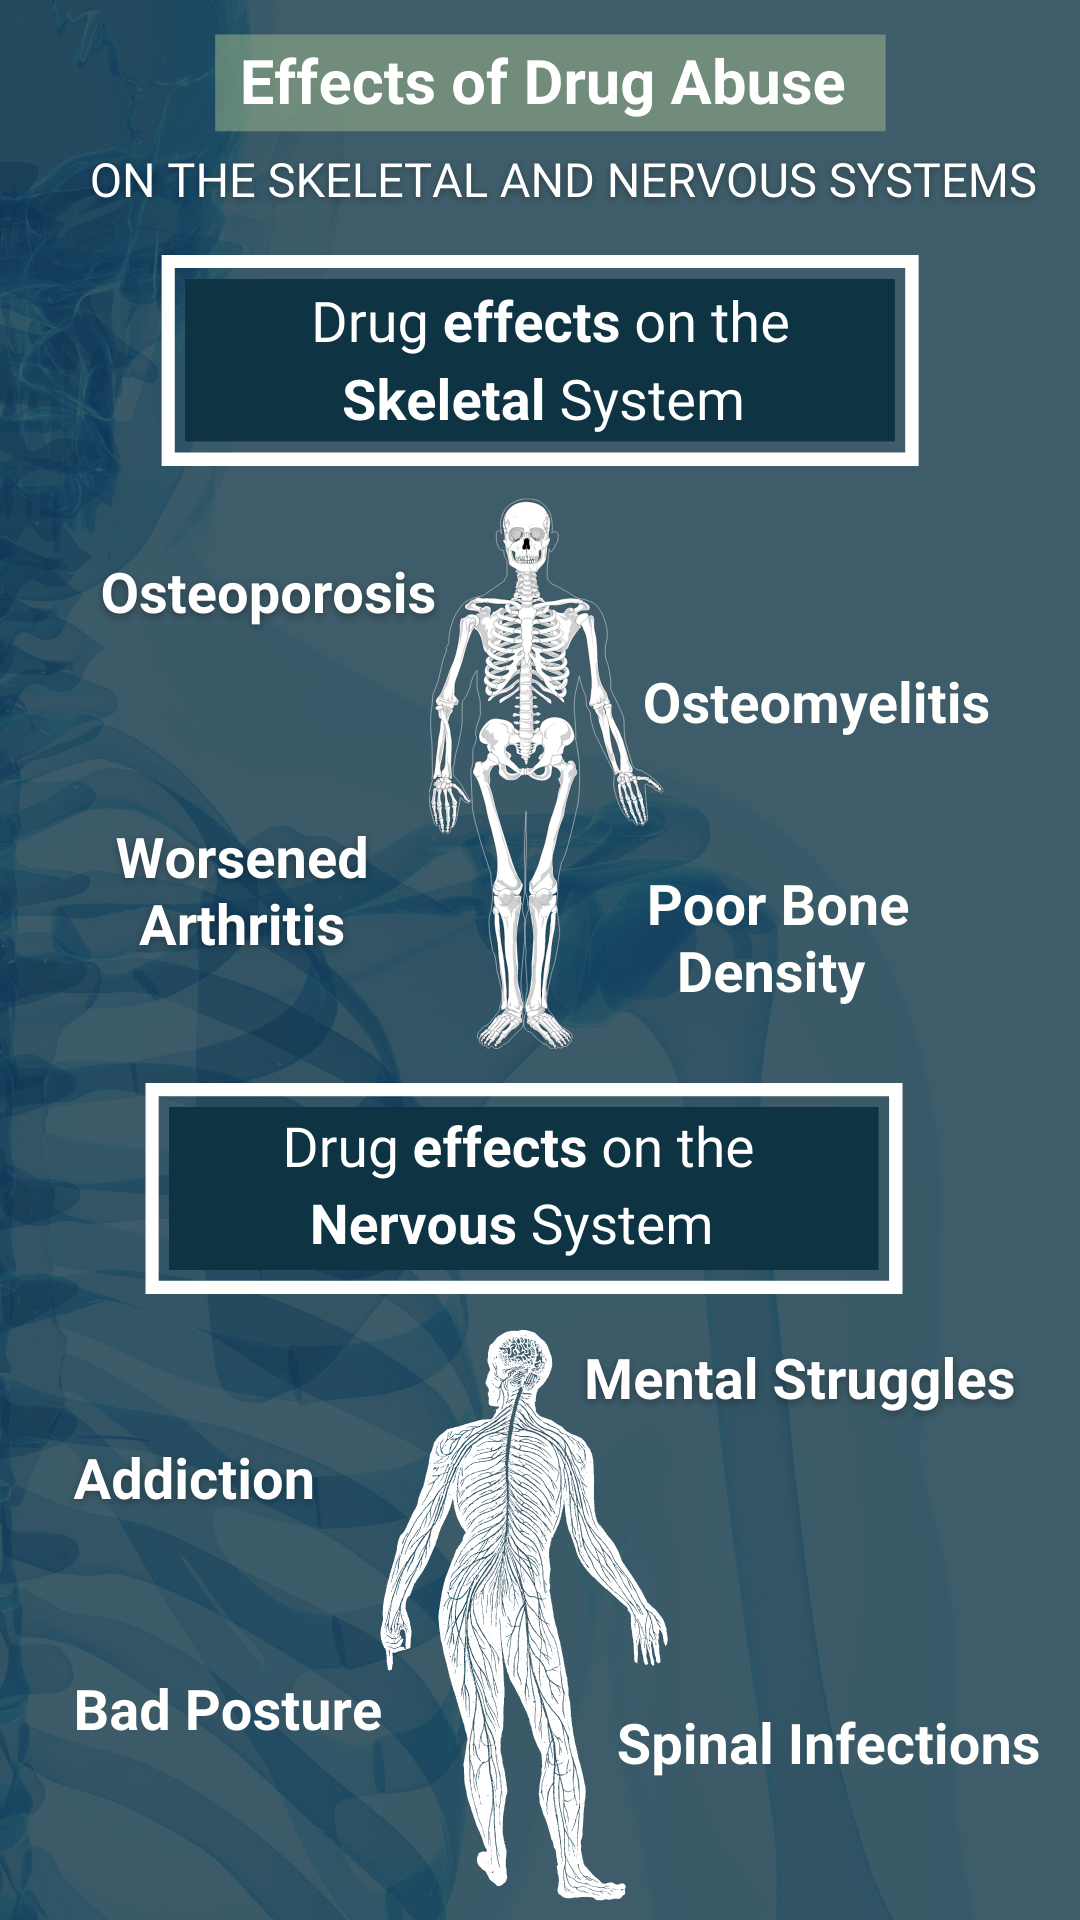 The Effects of Prolonged Drug & Alcohol Abuse on the Skeletal & Nervous System